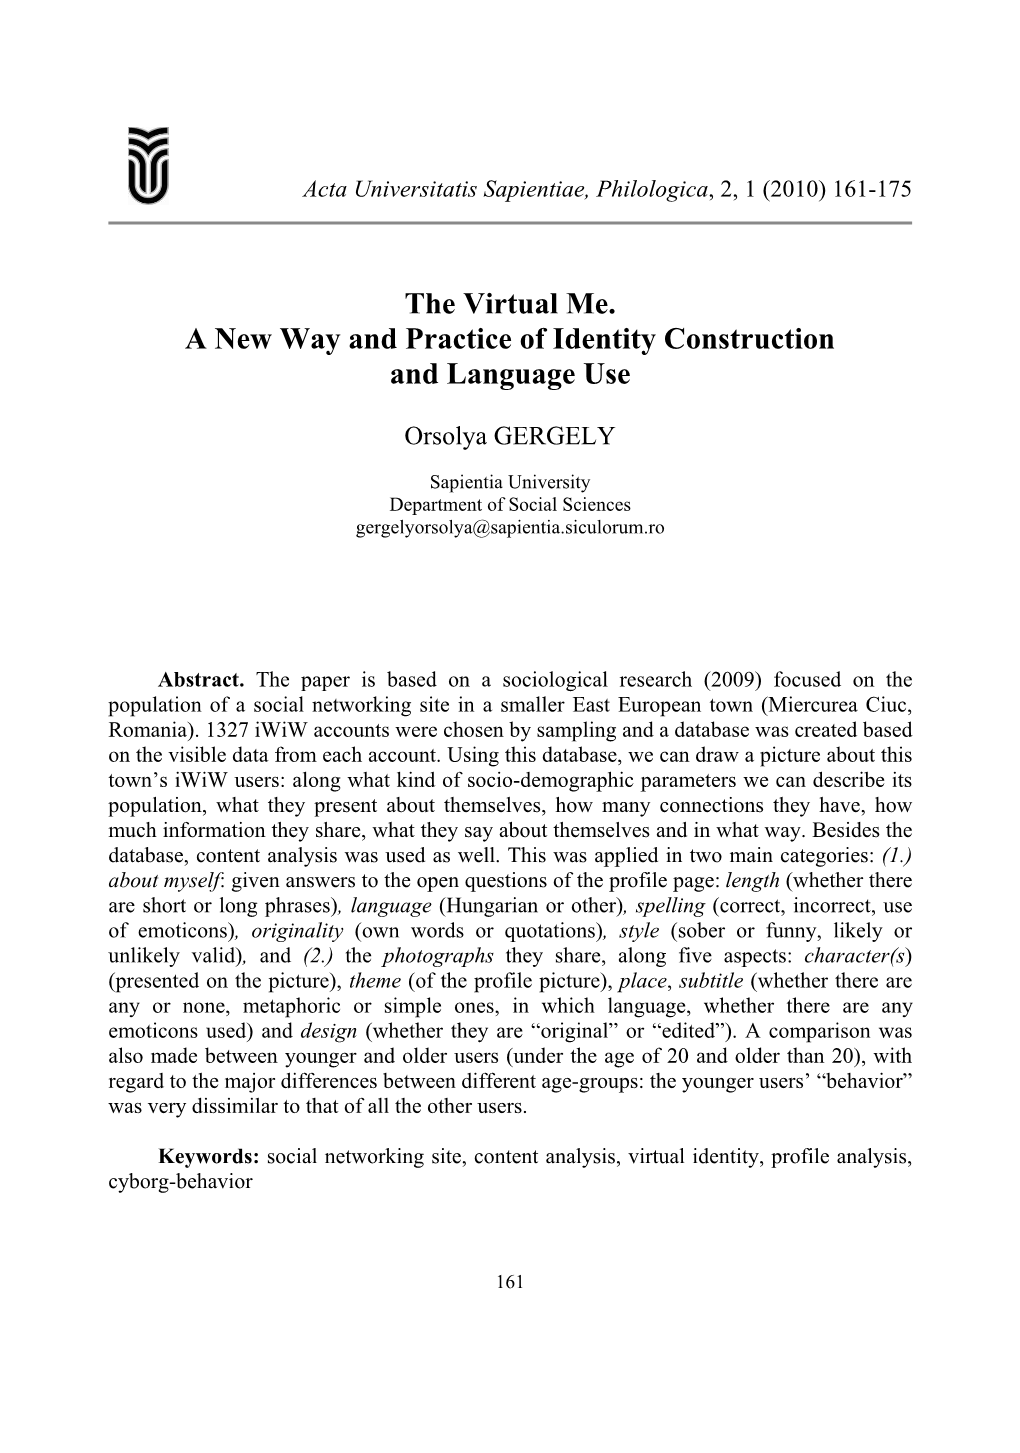 The Virtual Me. a New Way and Practice of Identity Construction and Language Use